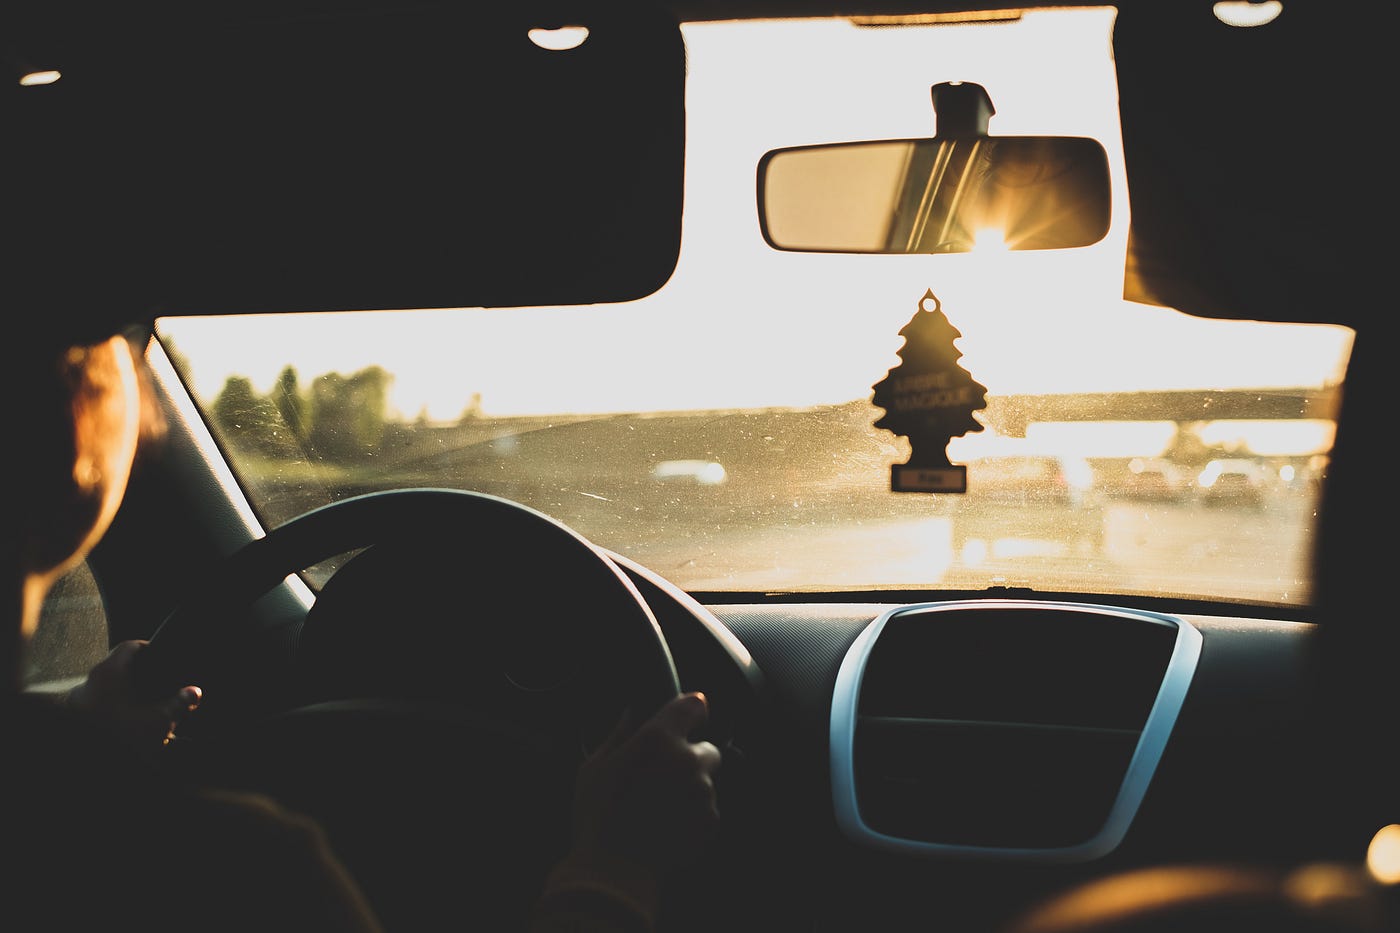 It's Against the Law in Some U.S. States to Drive with an Air Freshener  Hanging from Your Rearview Mirror, by Jennifer Geer, ILLUMINATION-Curated